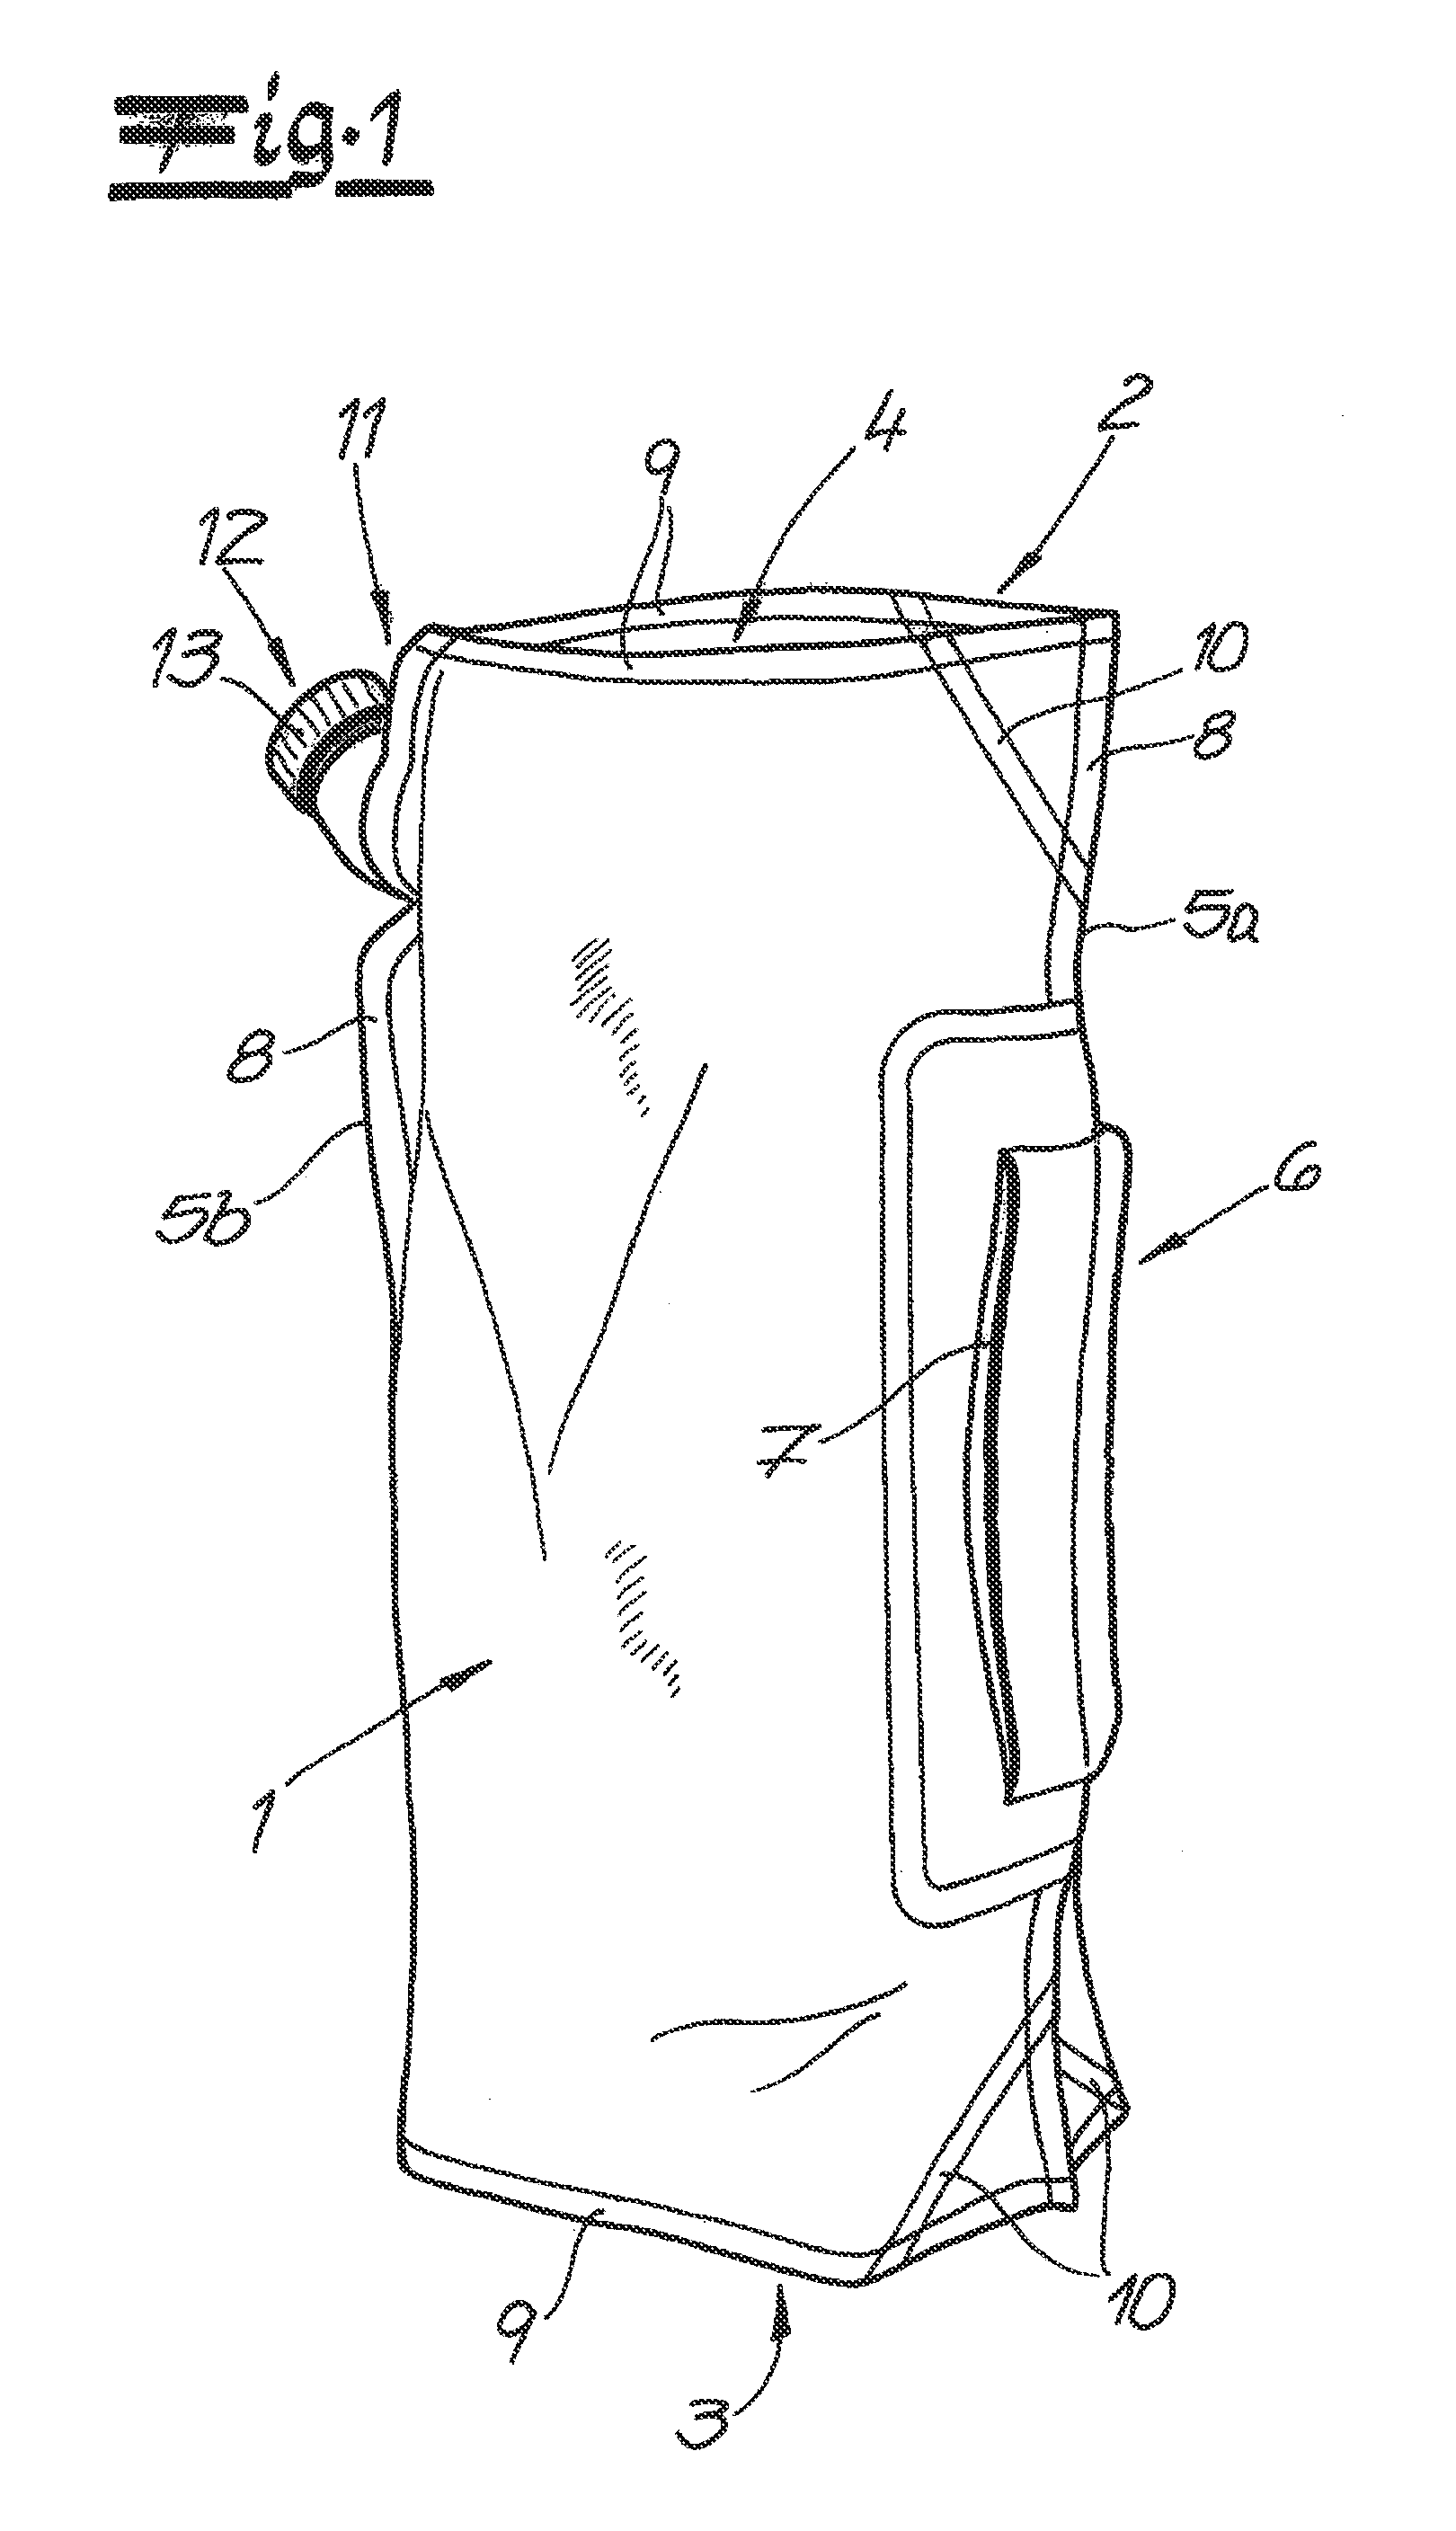 Stand-up bag for pourable goods and method for manufacturing the stand-up bag